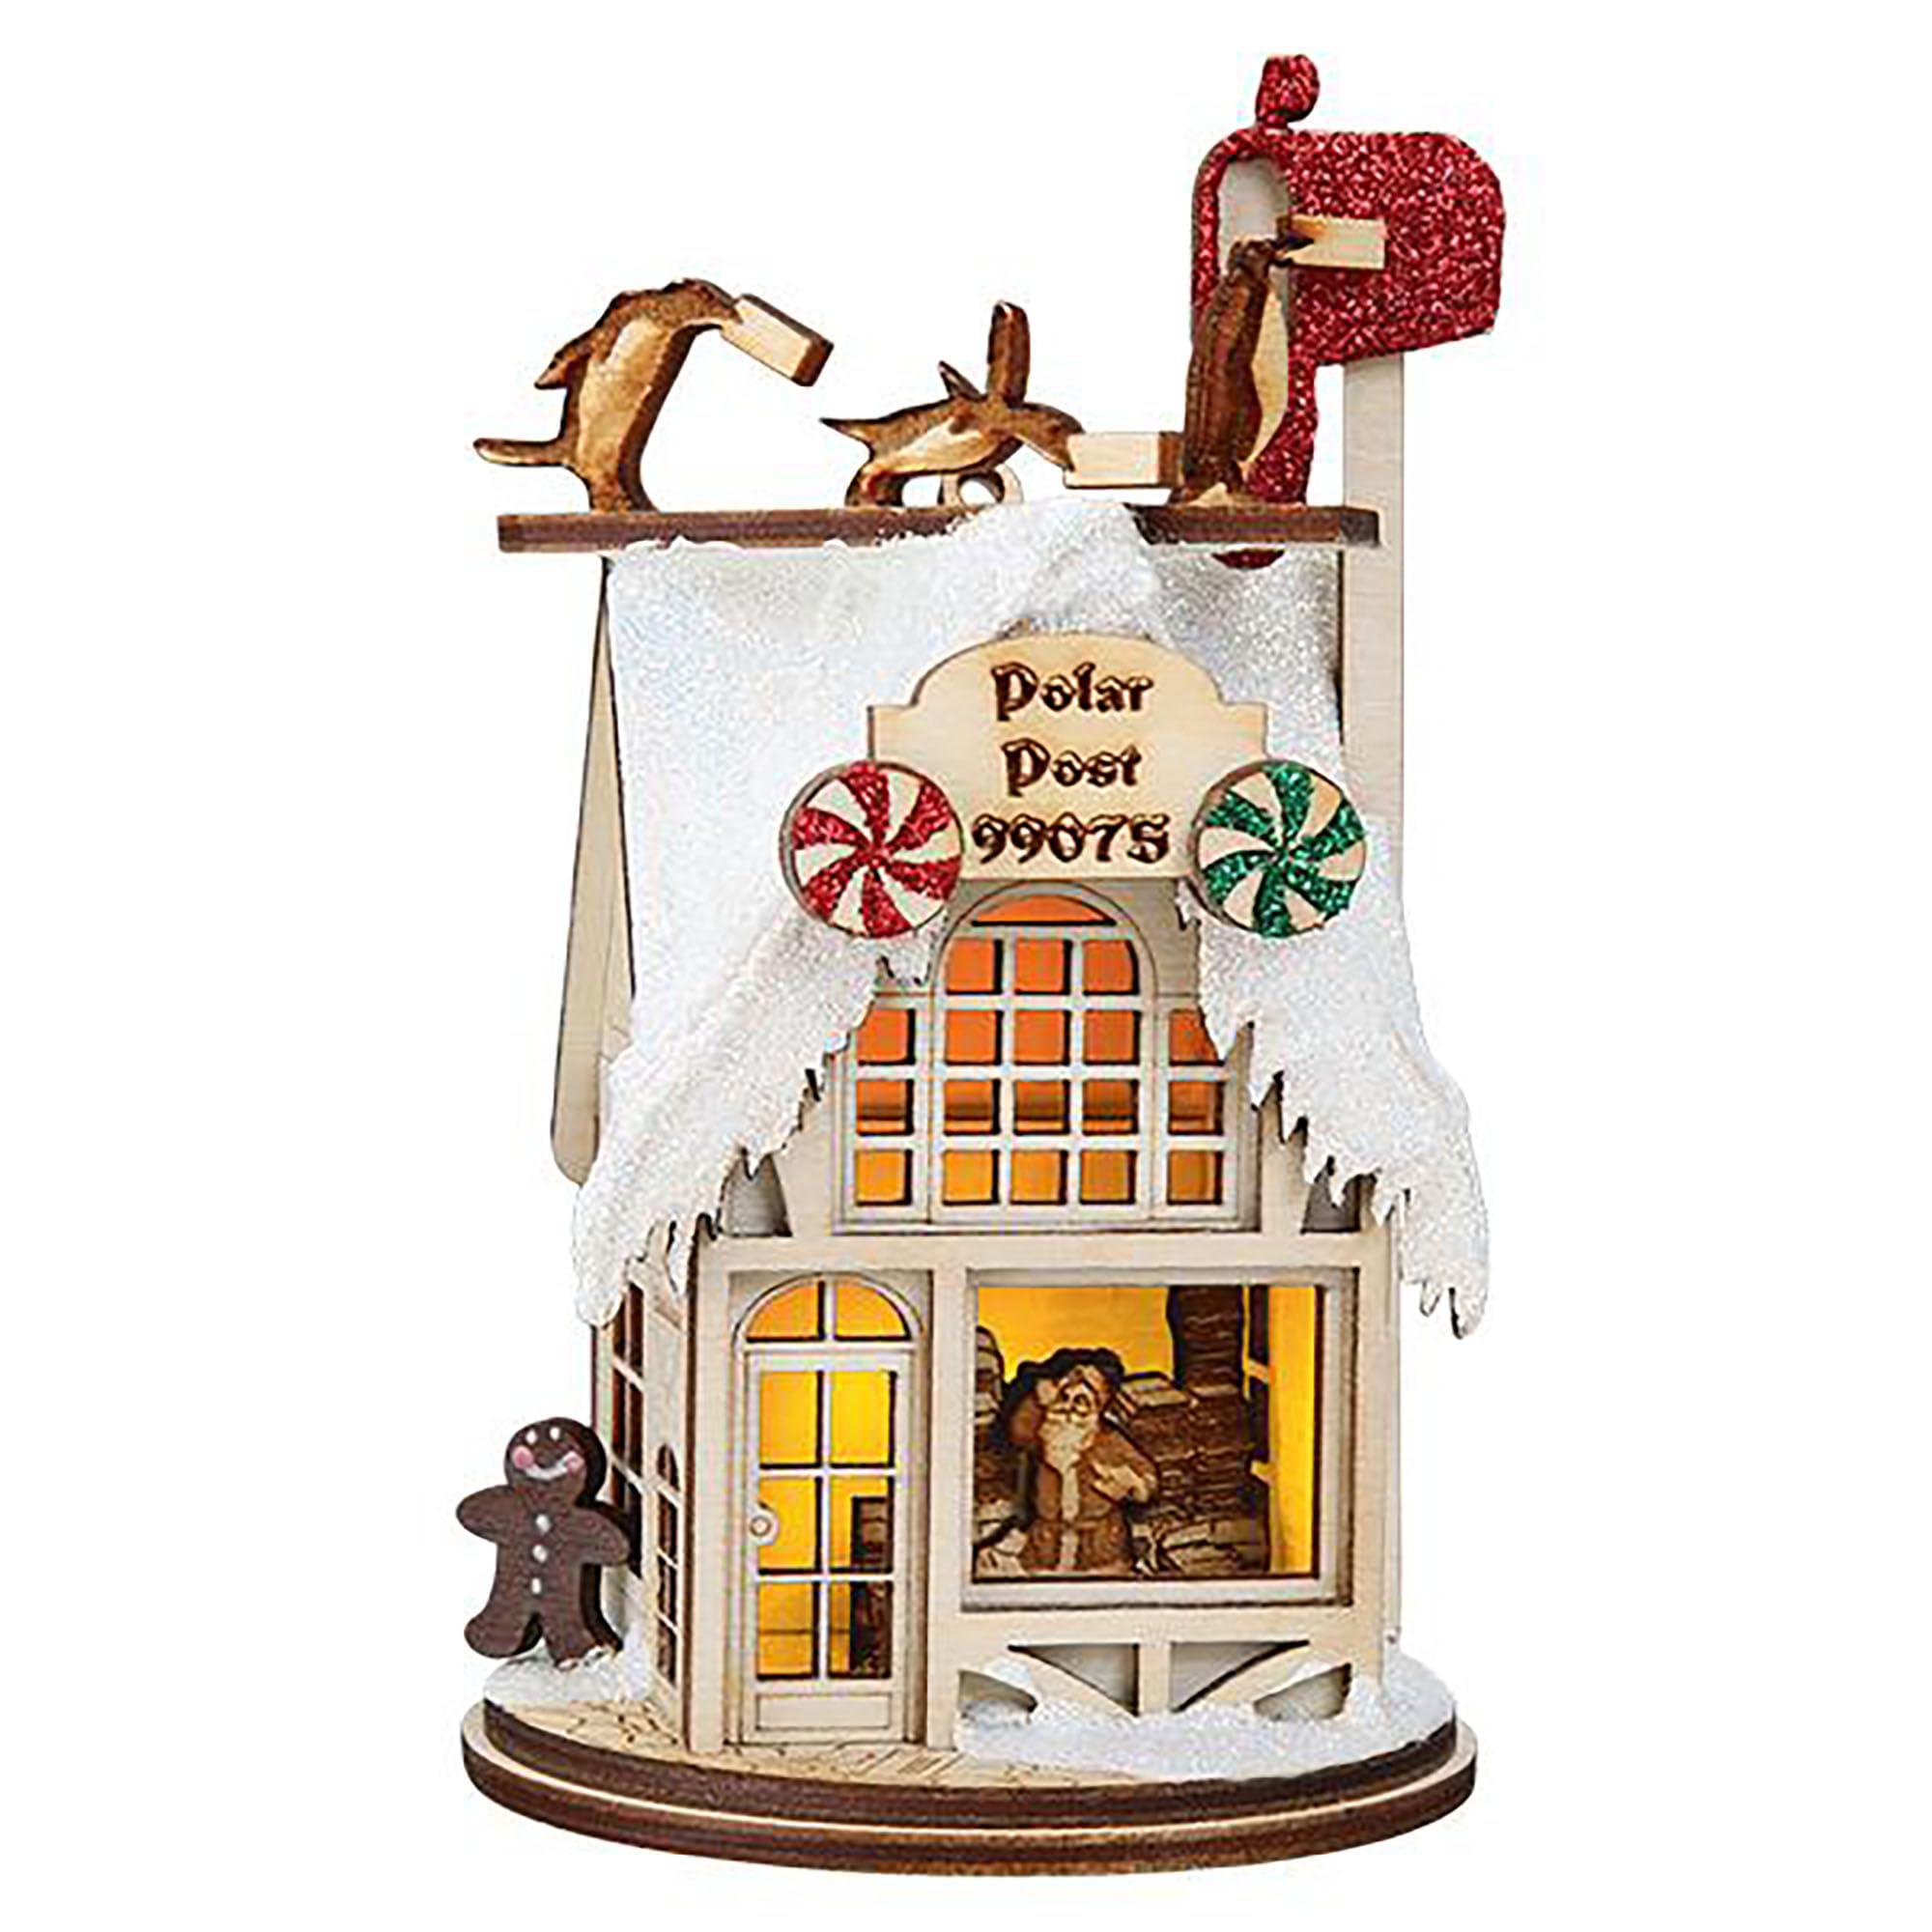 Old World Christmas ginger cottages polar post office ornaments for christmas tree